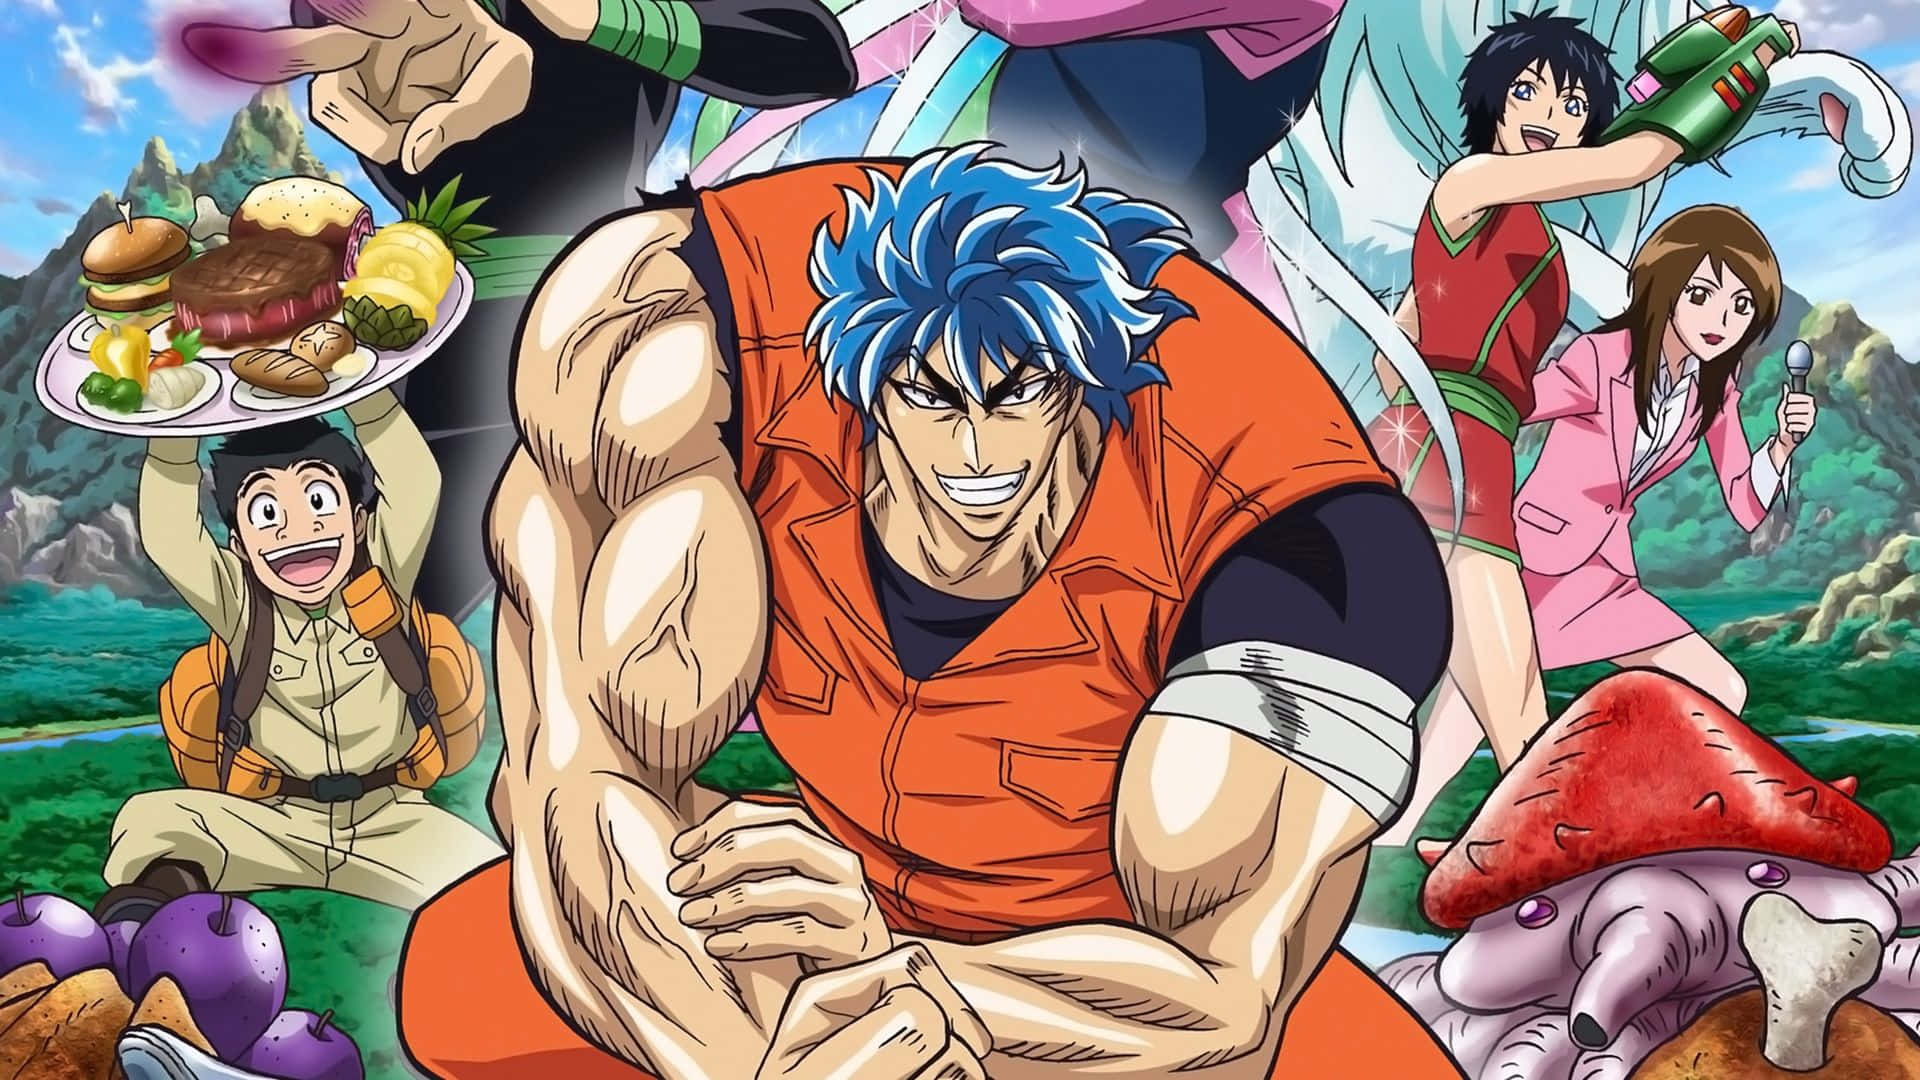 Download Share a meal with friends in Toriko Wallpaper